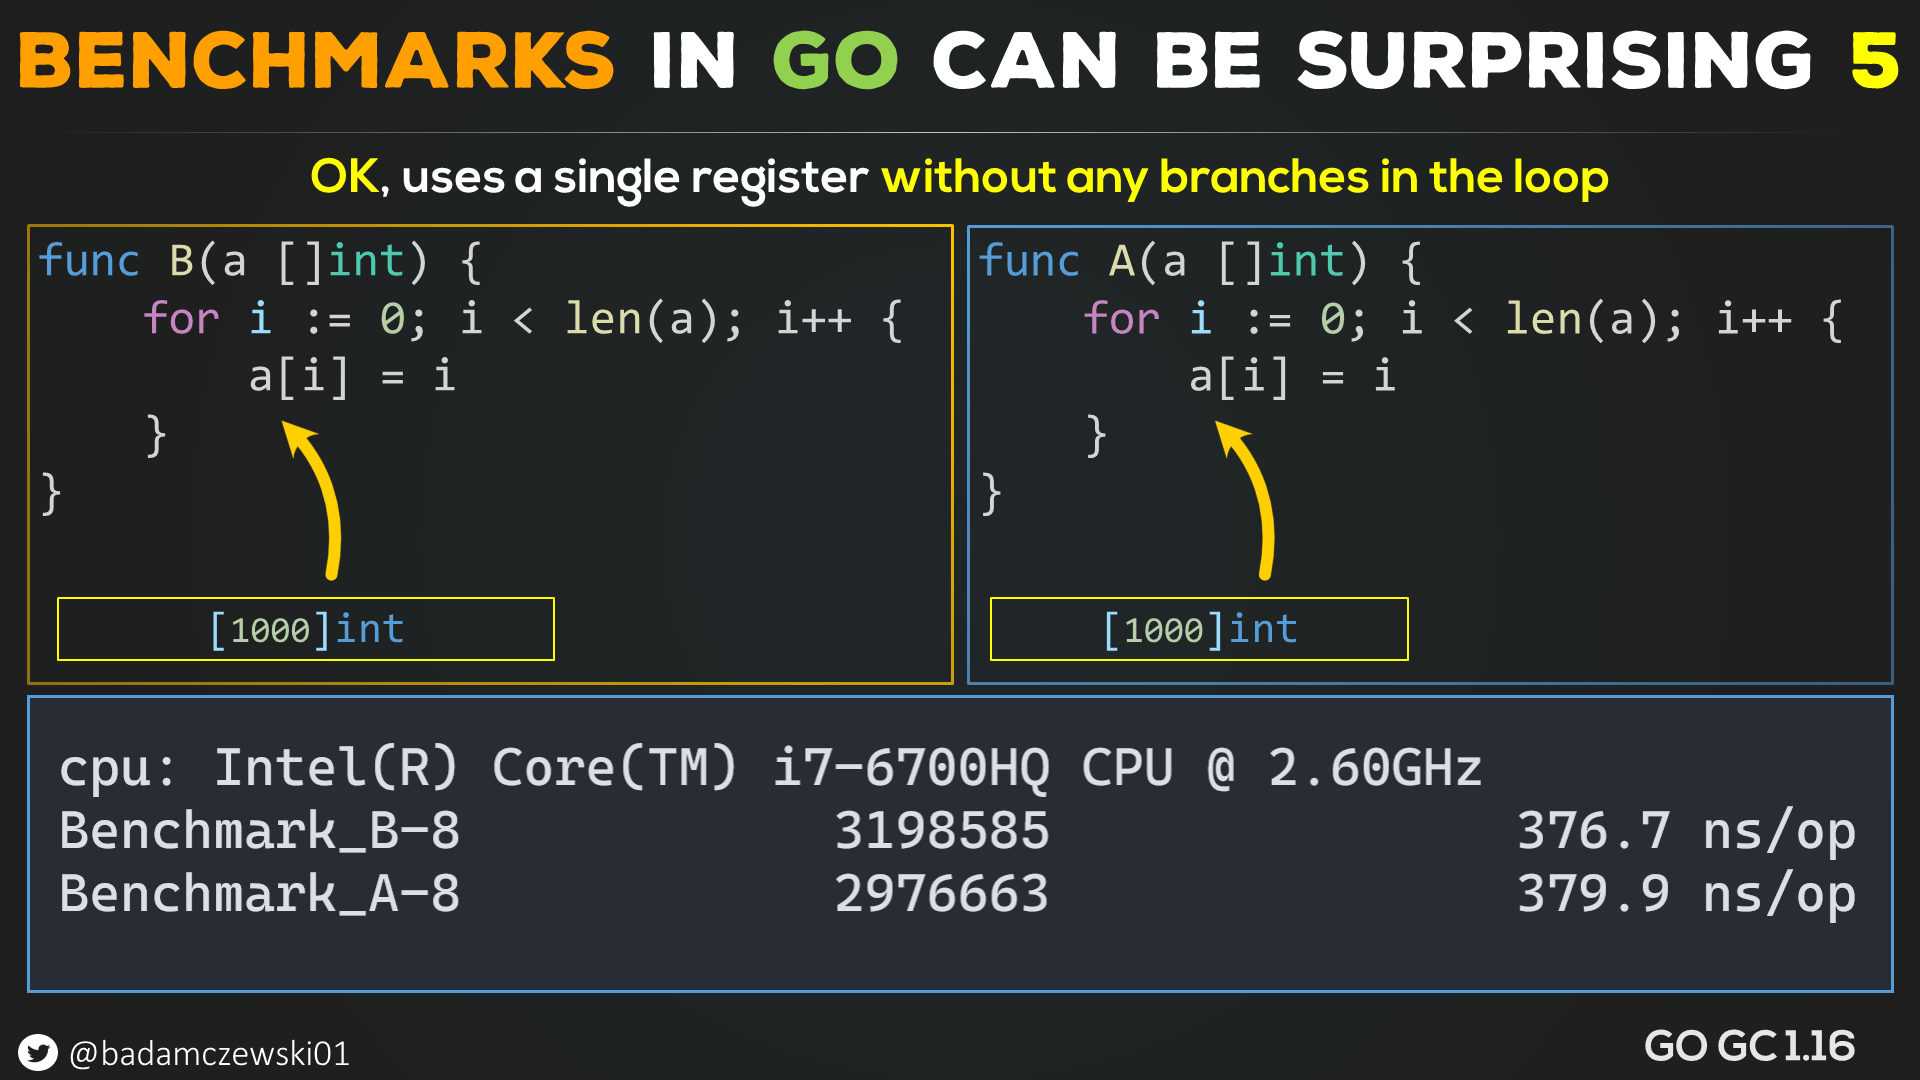 Benchmarks in GO can be surprising